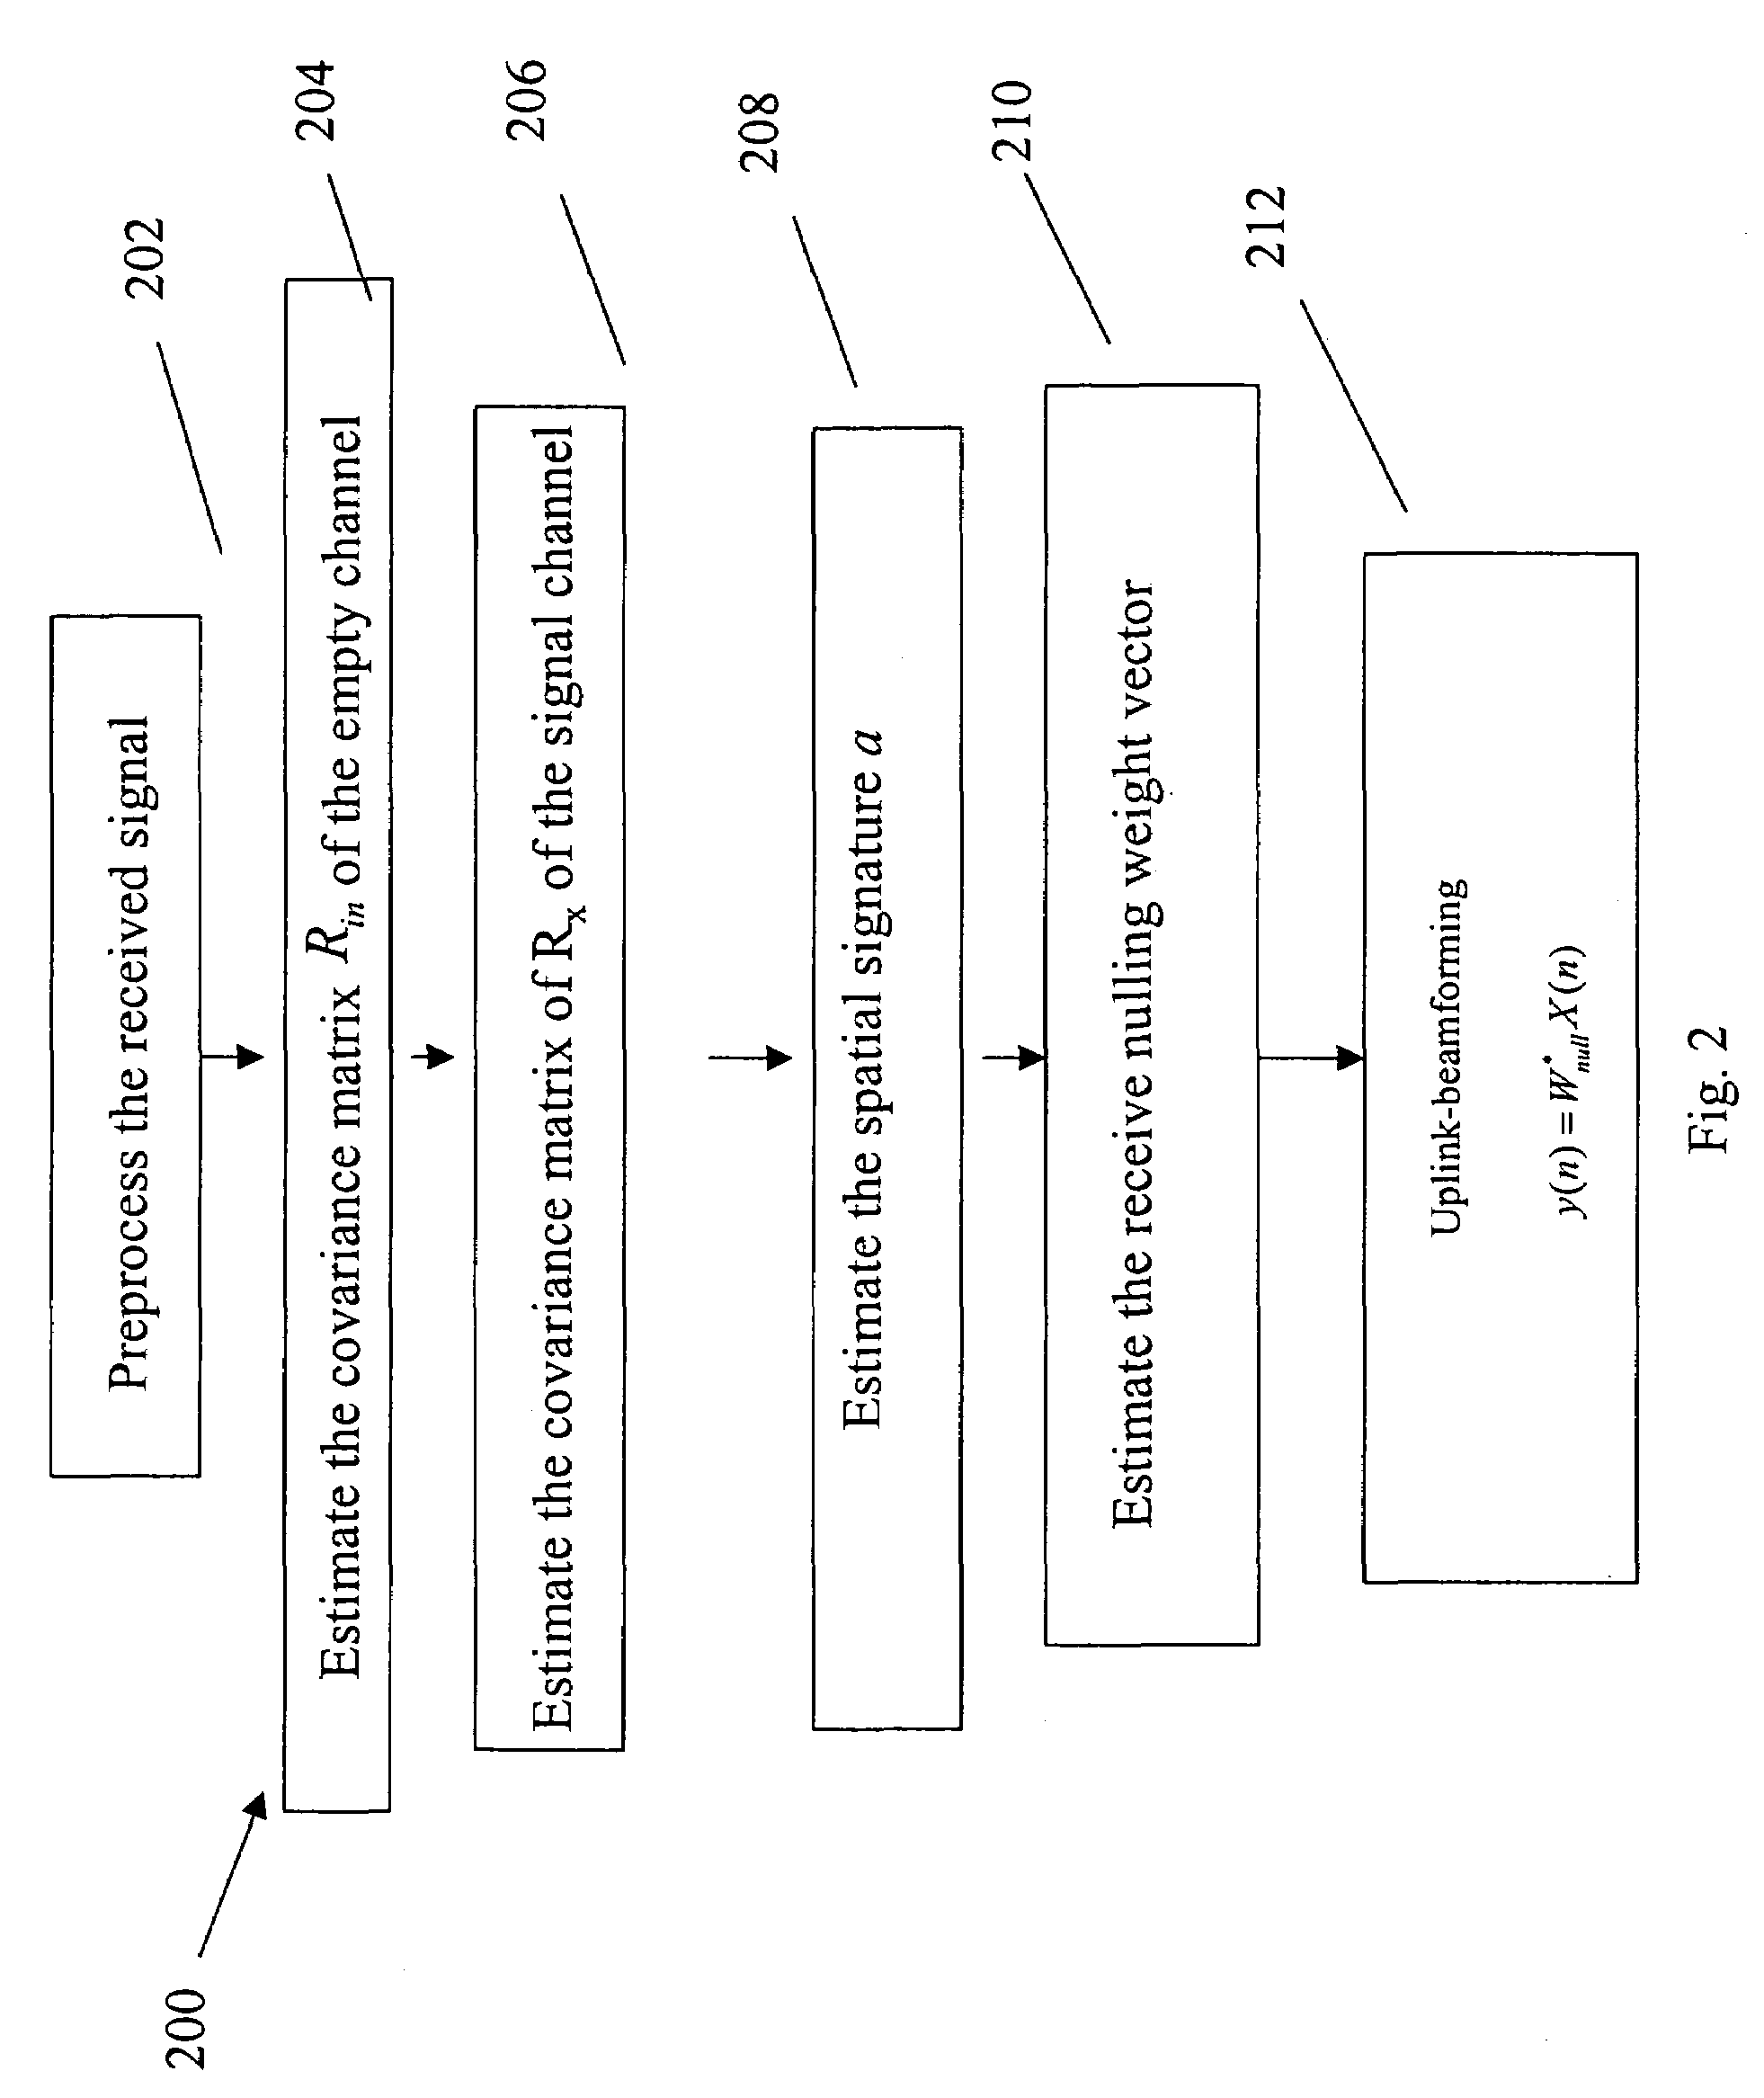 Method and system for interference assessment and reduction in a wireless communication system